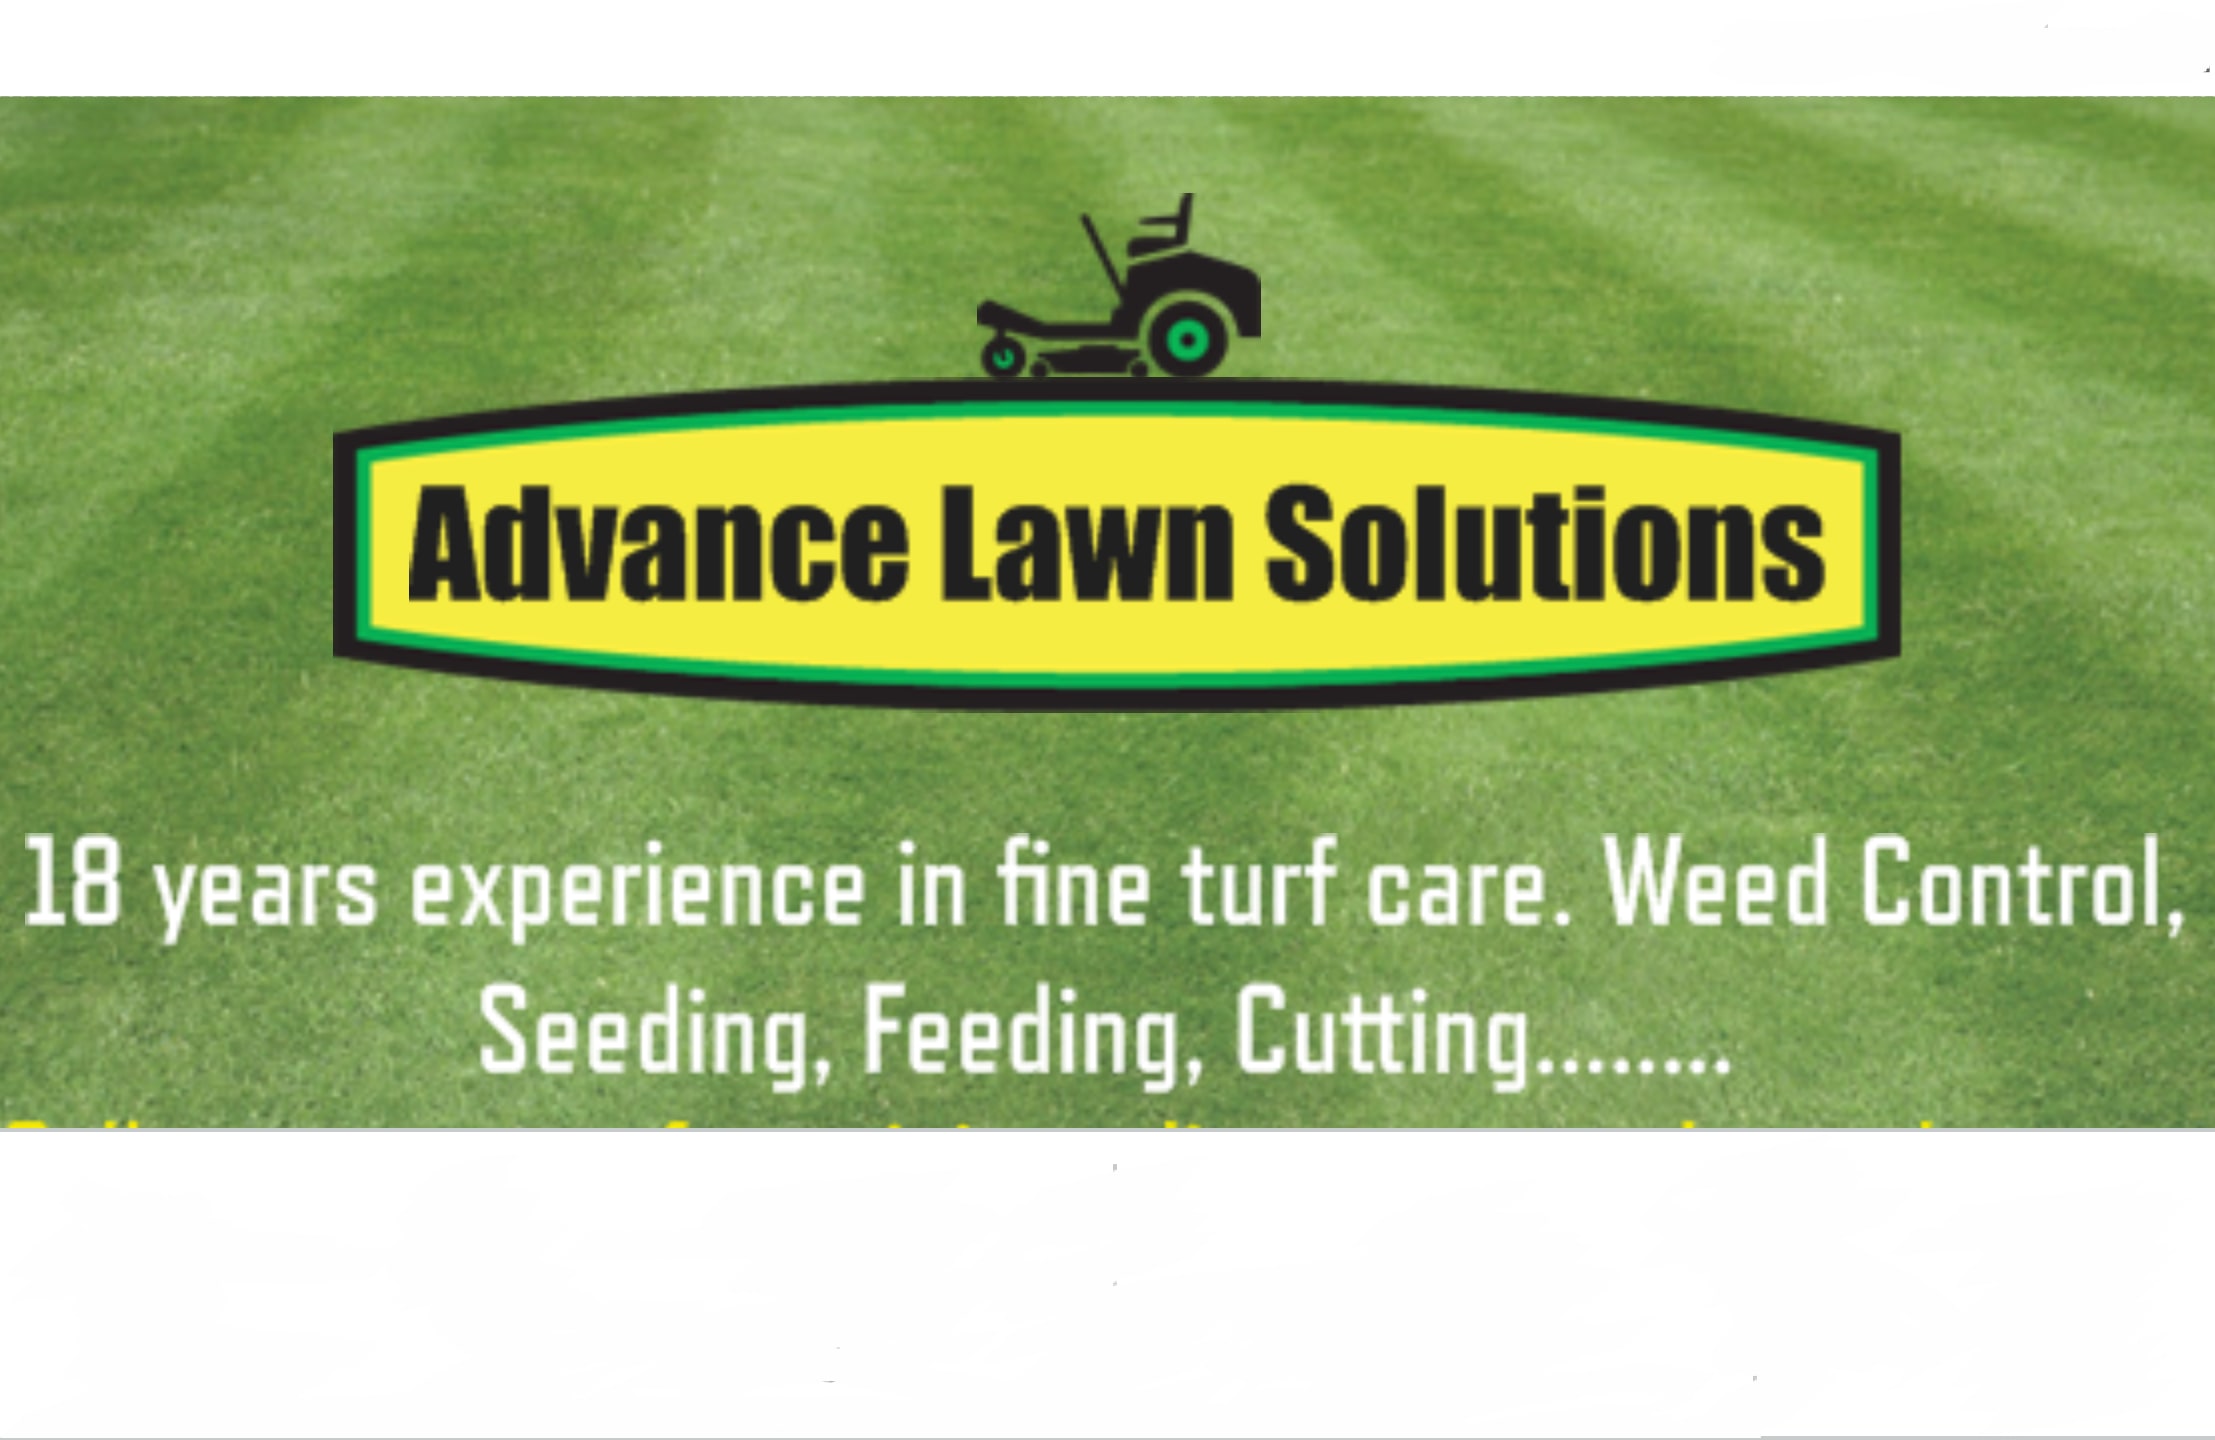 Advance Lawn Solutions